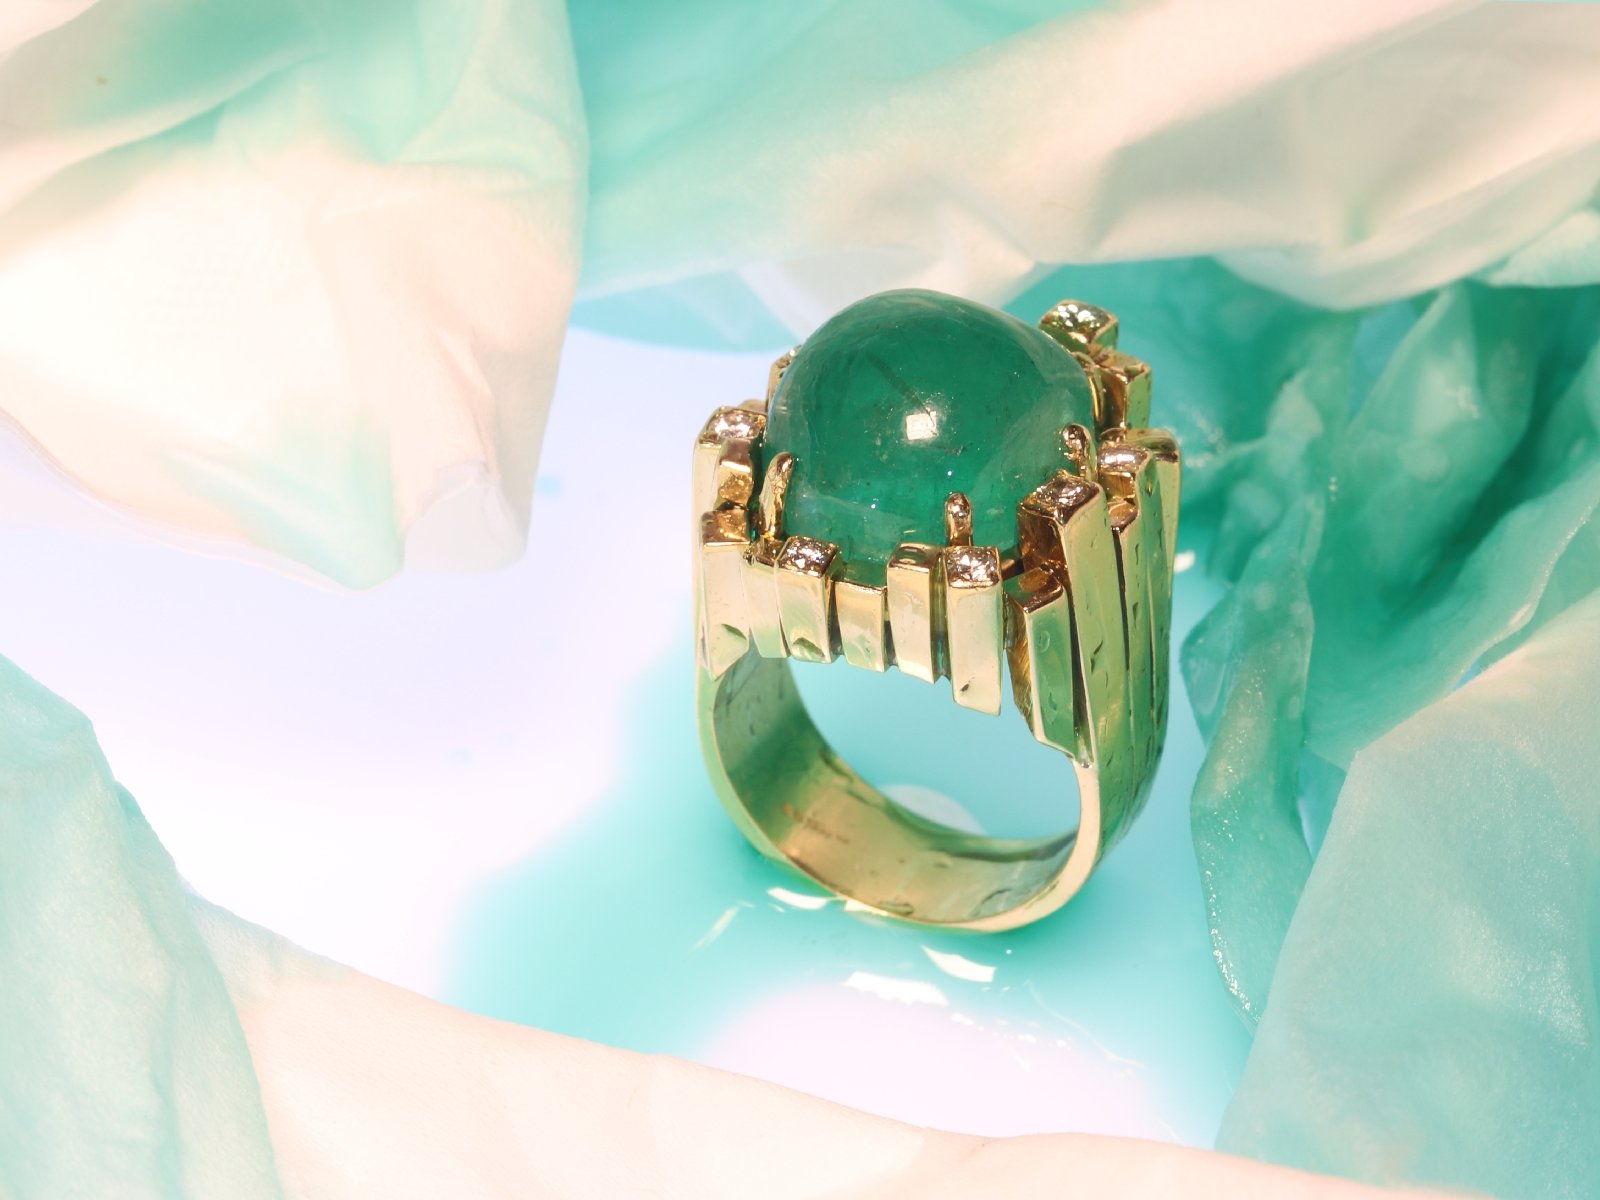 Click the picture to get to see this Vintage Seventies Modernistic Artist Design ring with large emerald and diamonds.